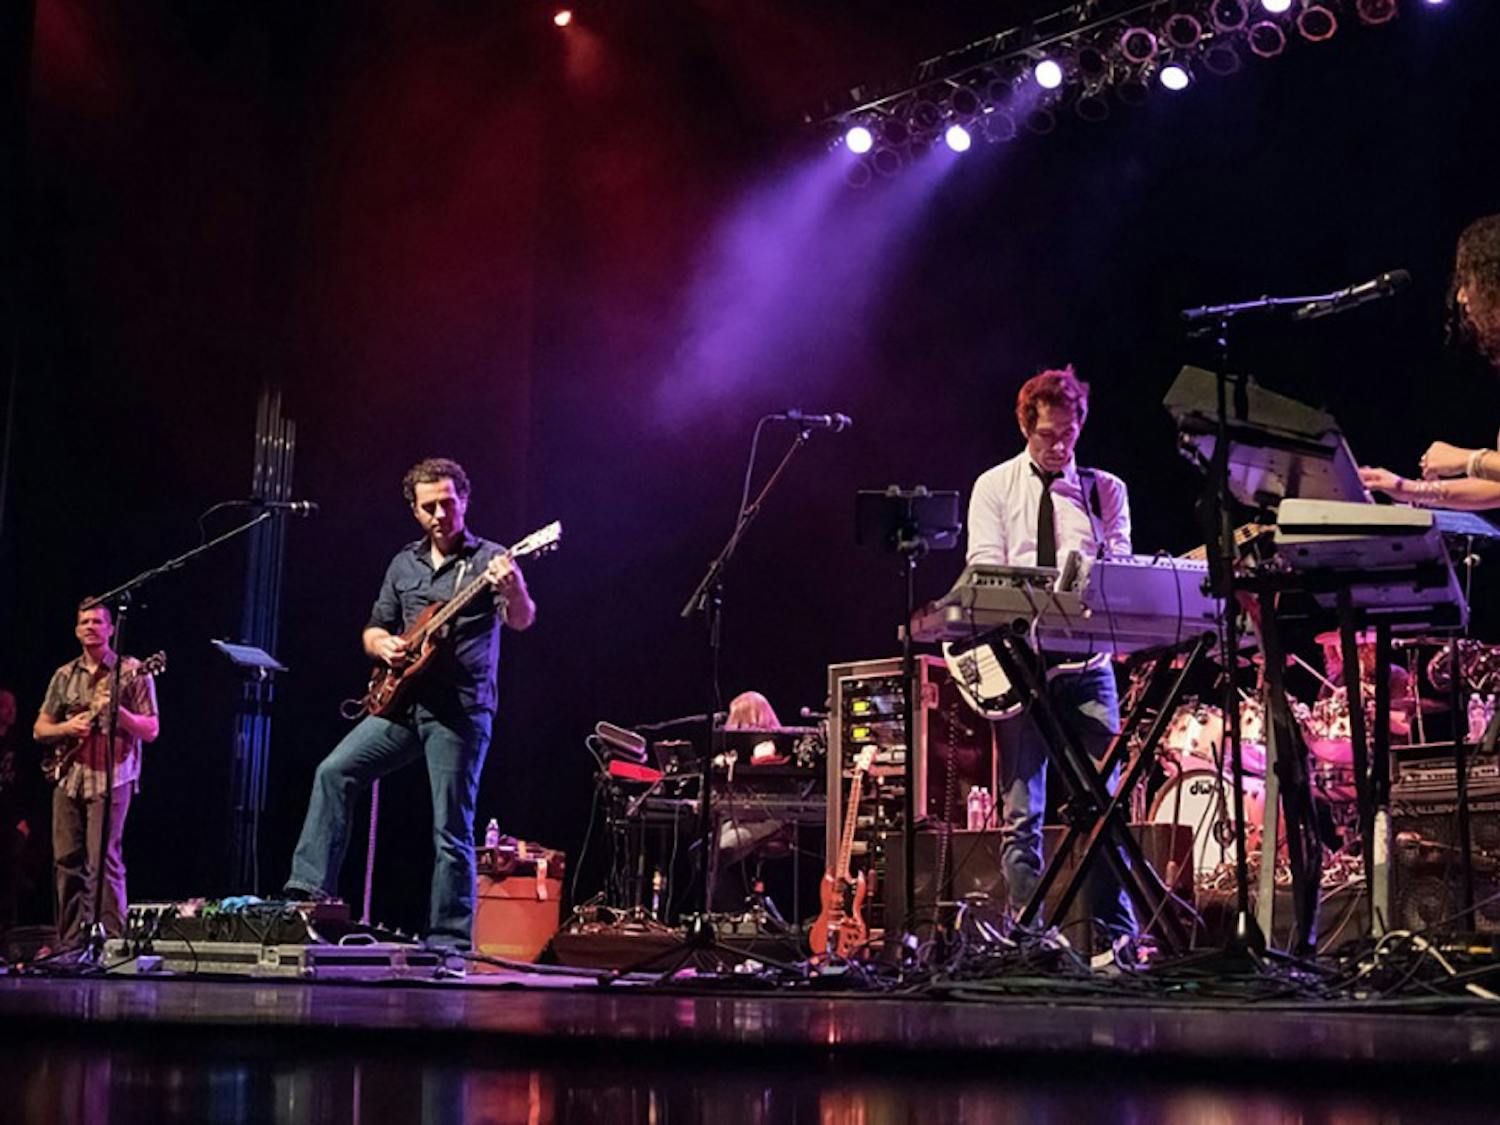 Dweezil Zappa pays tribute to his father’s music in his “Zappa Plays Zappa” performance in the Center for the Arts in March. The CFA has announced its fall schedule, which includes dance company LehrerDance and humorist David Sedaris.